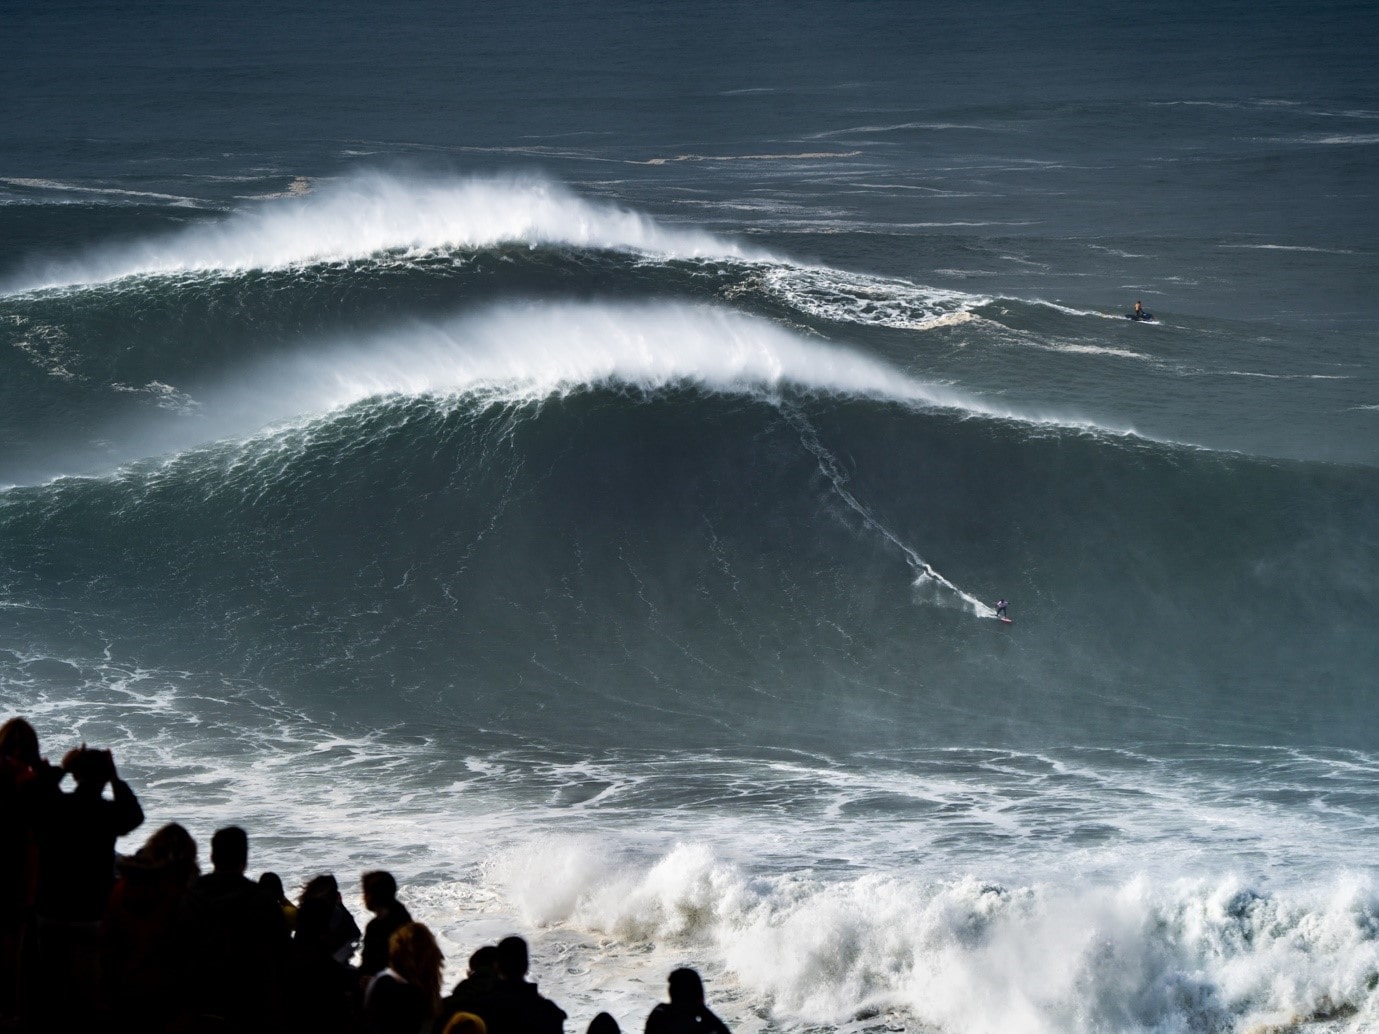 Nazaré waves are a wedge